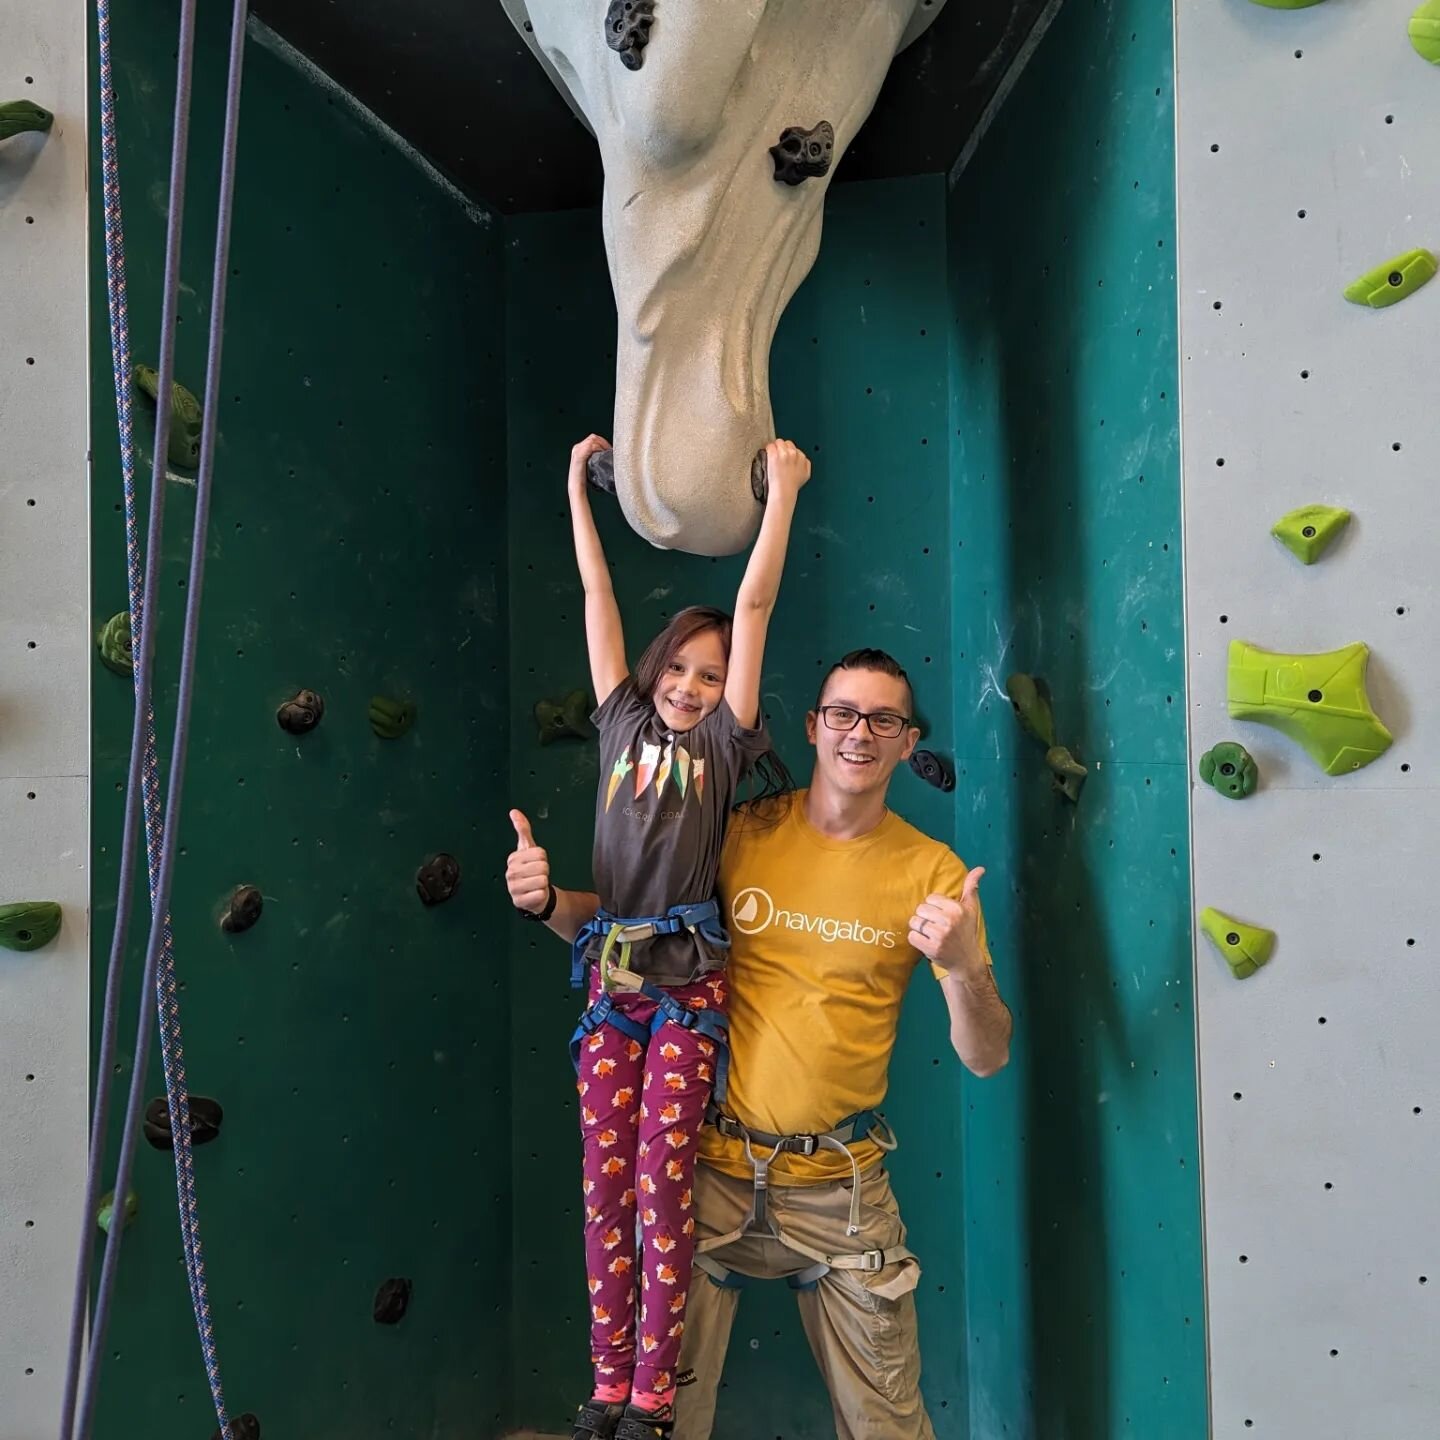 Ellie and I dropped Jewel and Lainy off at the airport heading to San Diego. 

Then we had a Daddy-Daughter date! We went to the rock climbing gym and hung it with Kaleb, and now we're eating at IHOP!